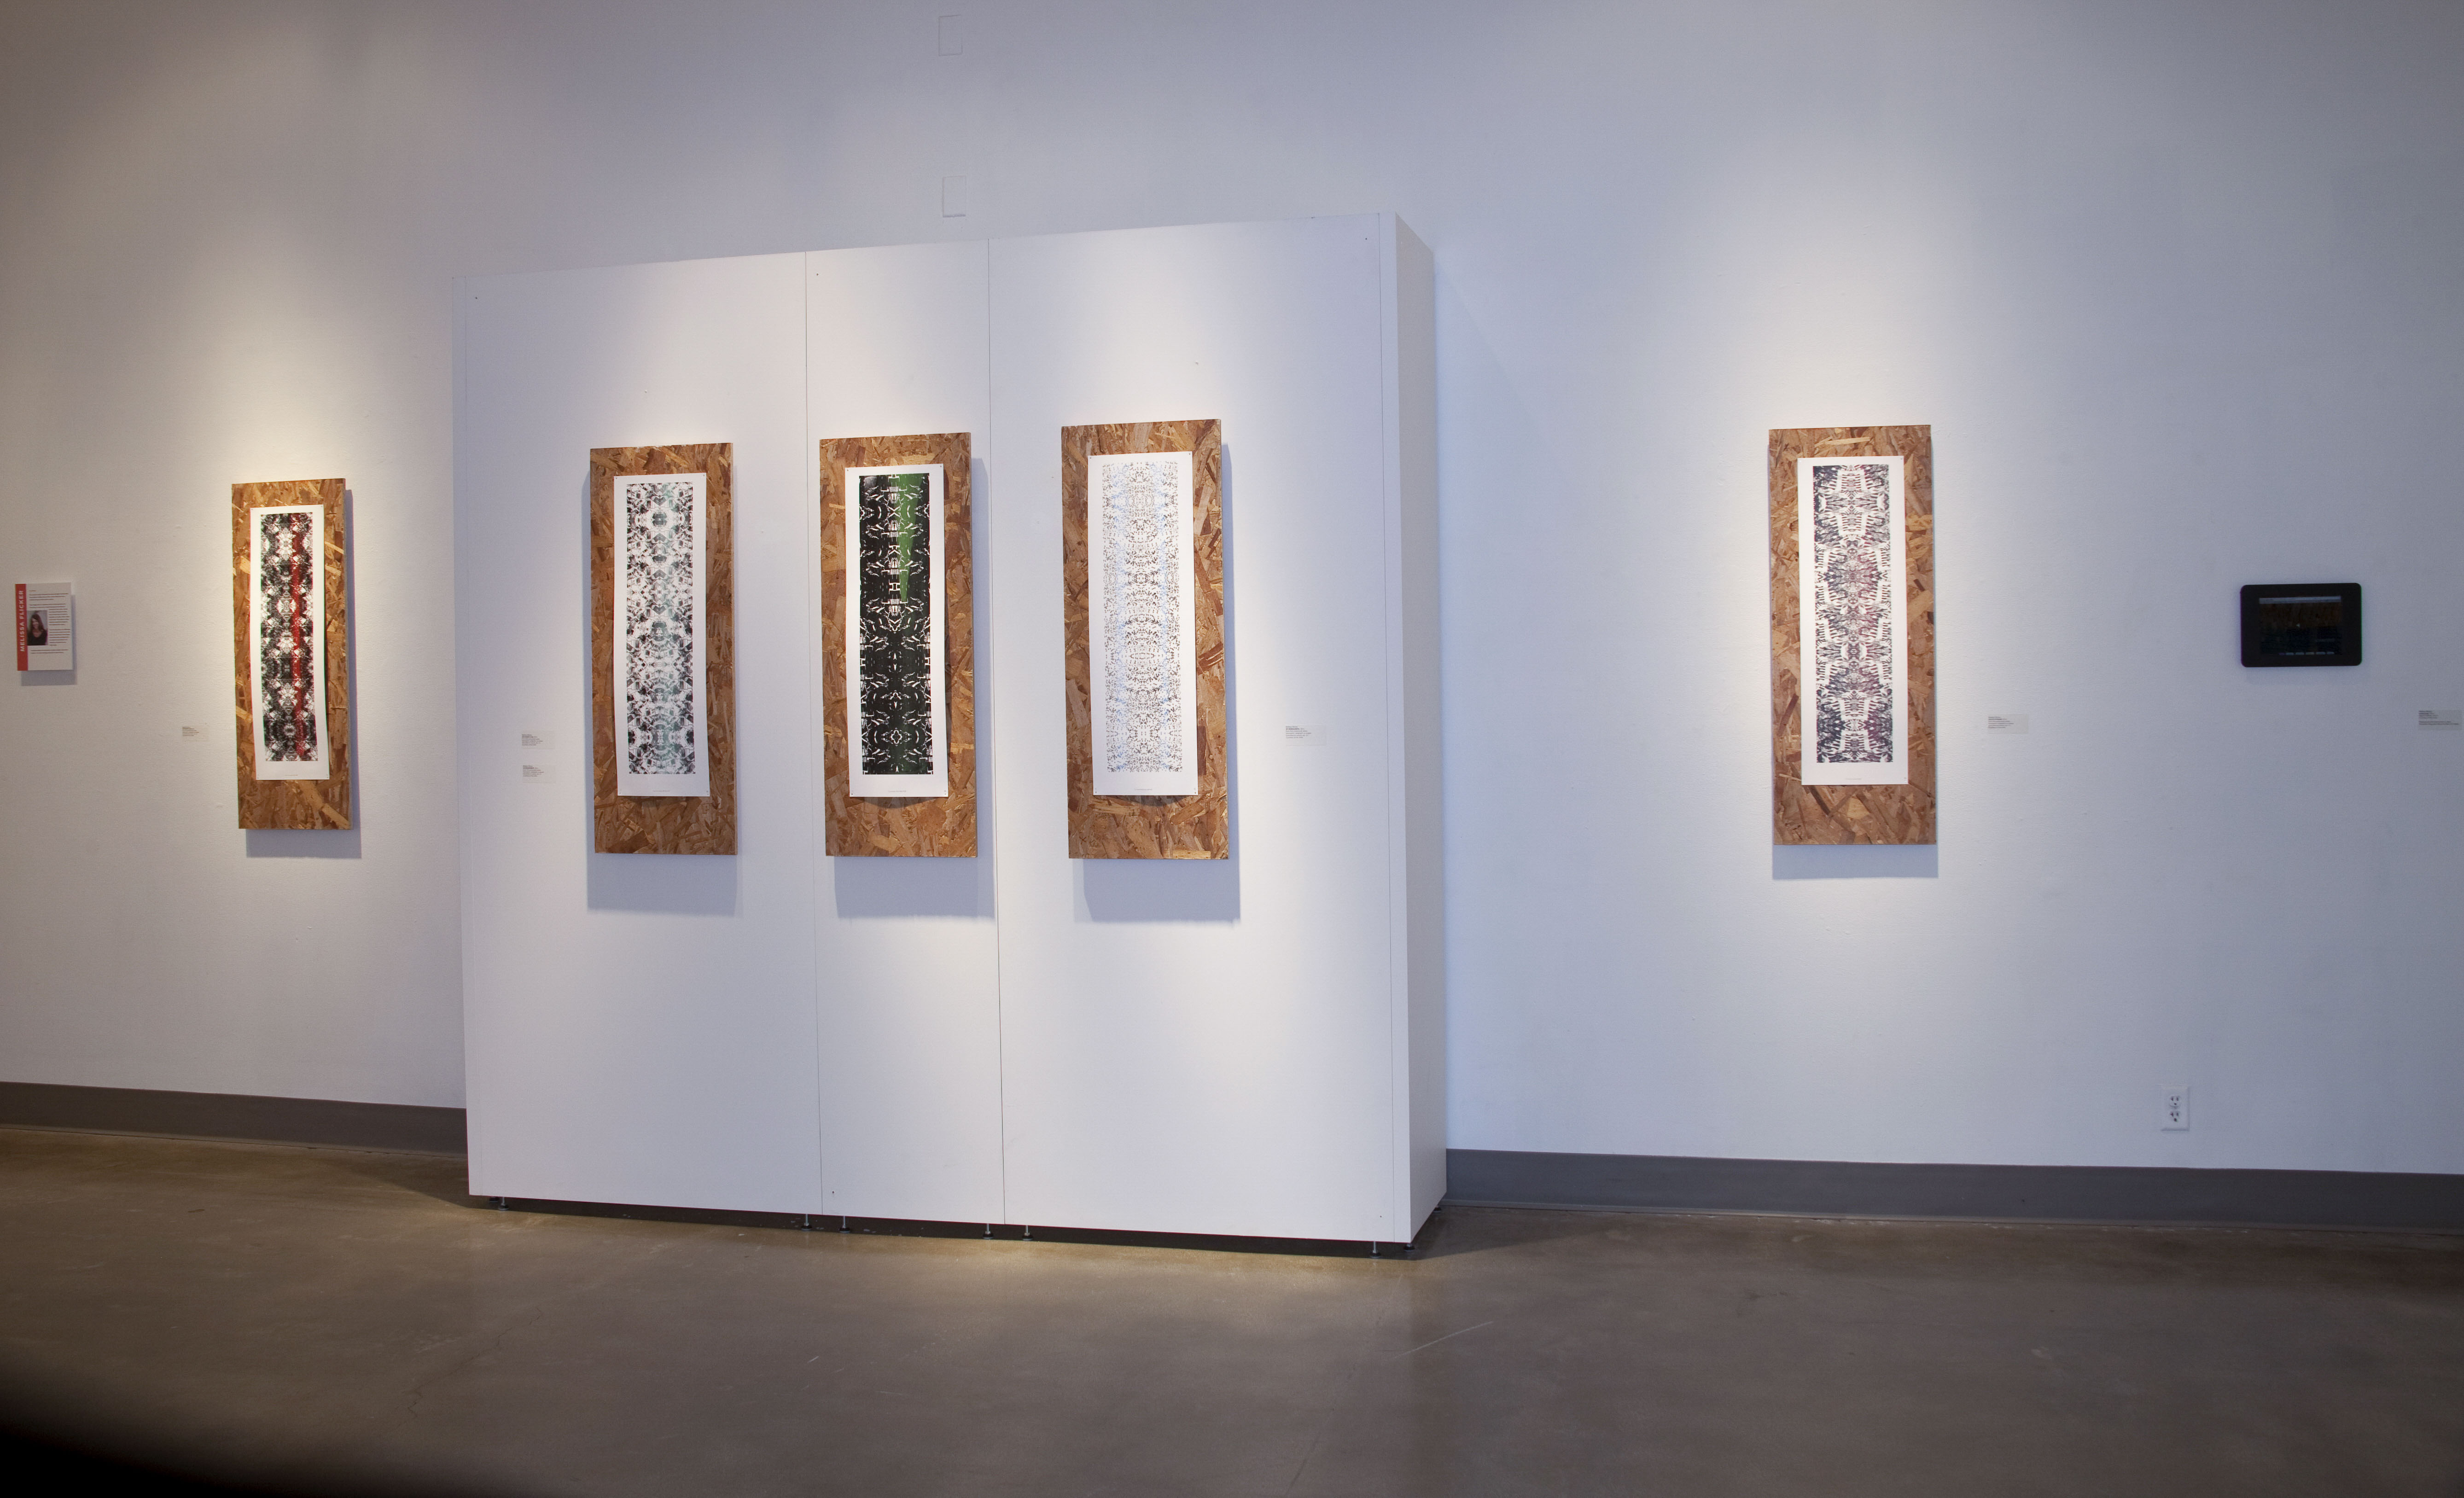 Installation View, Front West Gallery, Art Faculty Show 2014 Exhibition, Nov. 10, 2014 to Dec. 13, 2014.